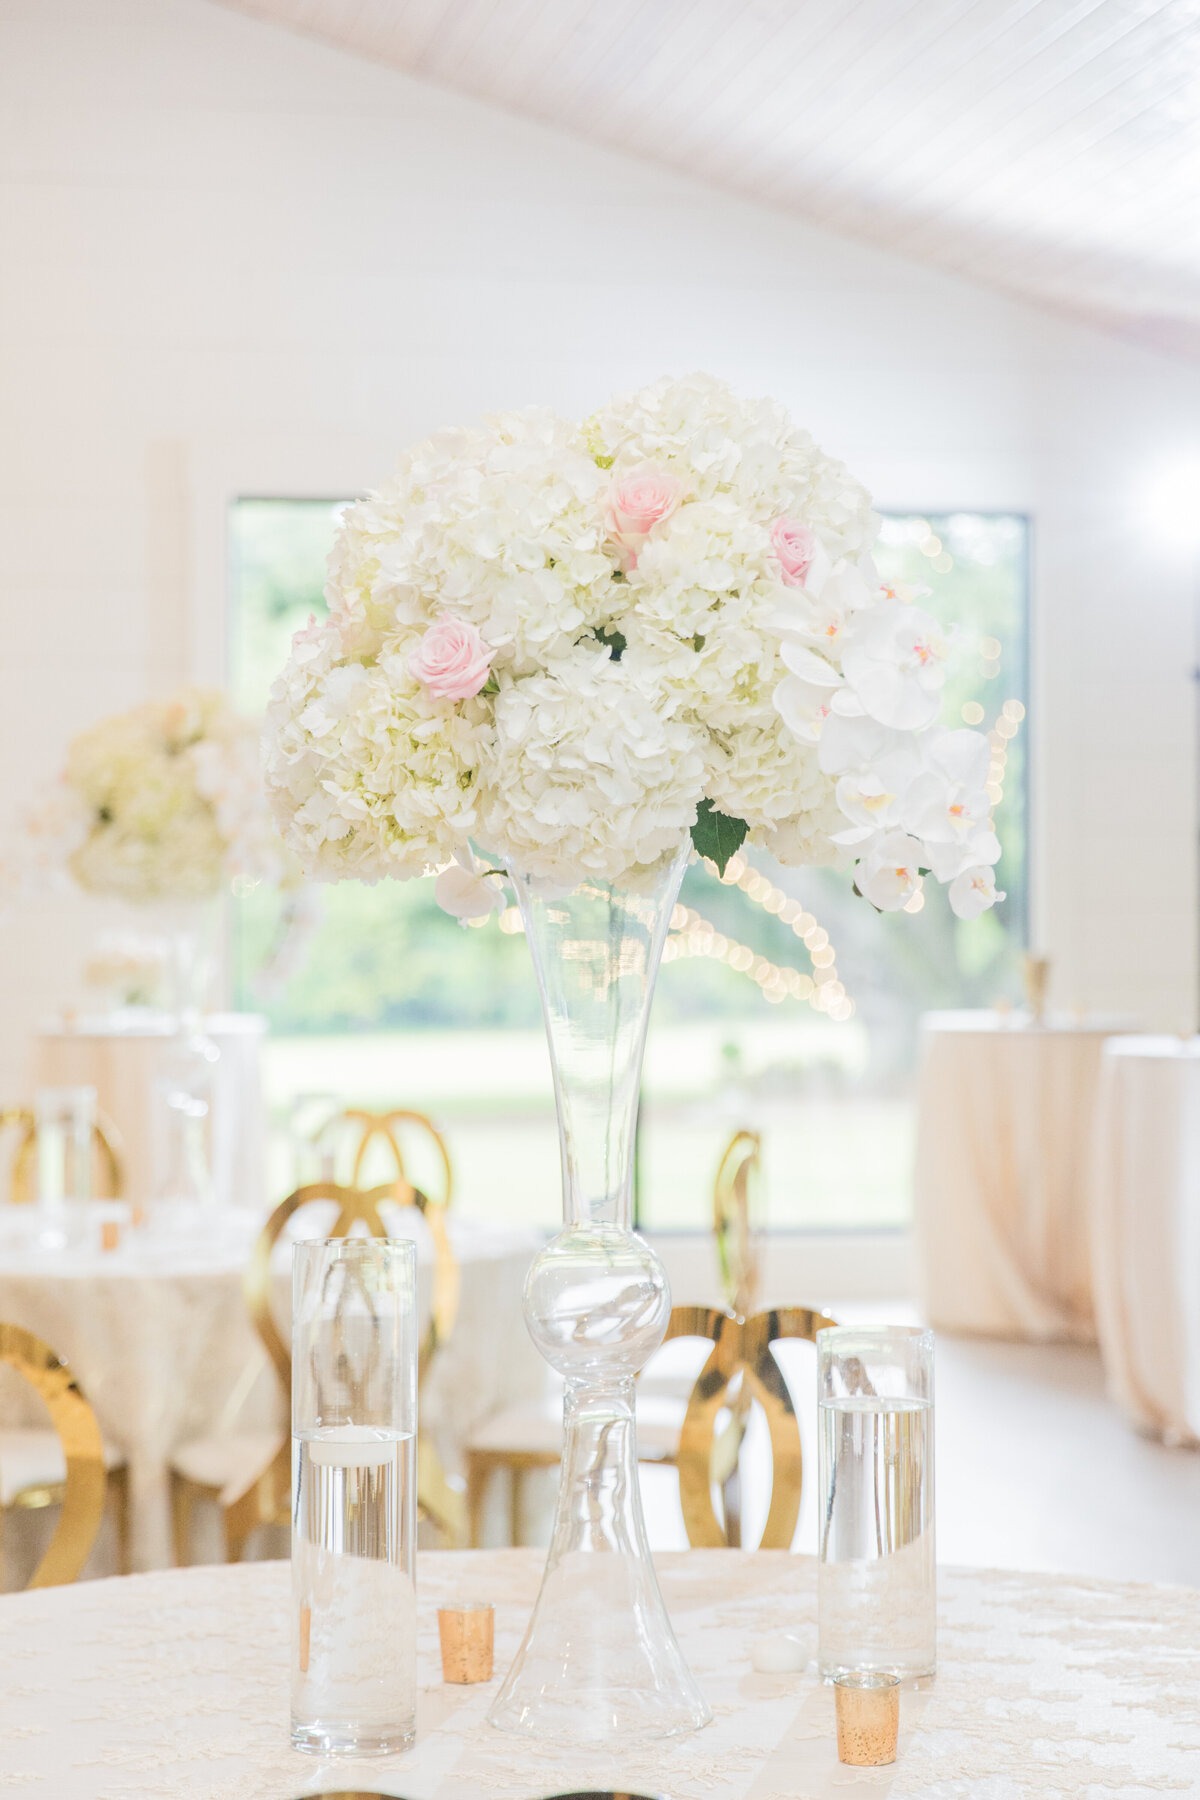 pink, white, and gold table decor at a wedding